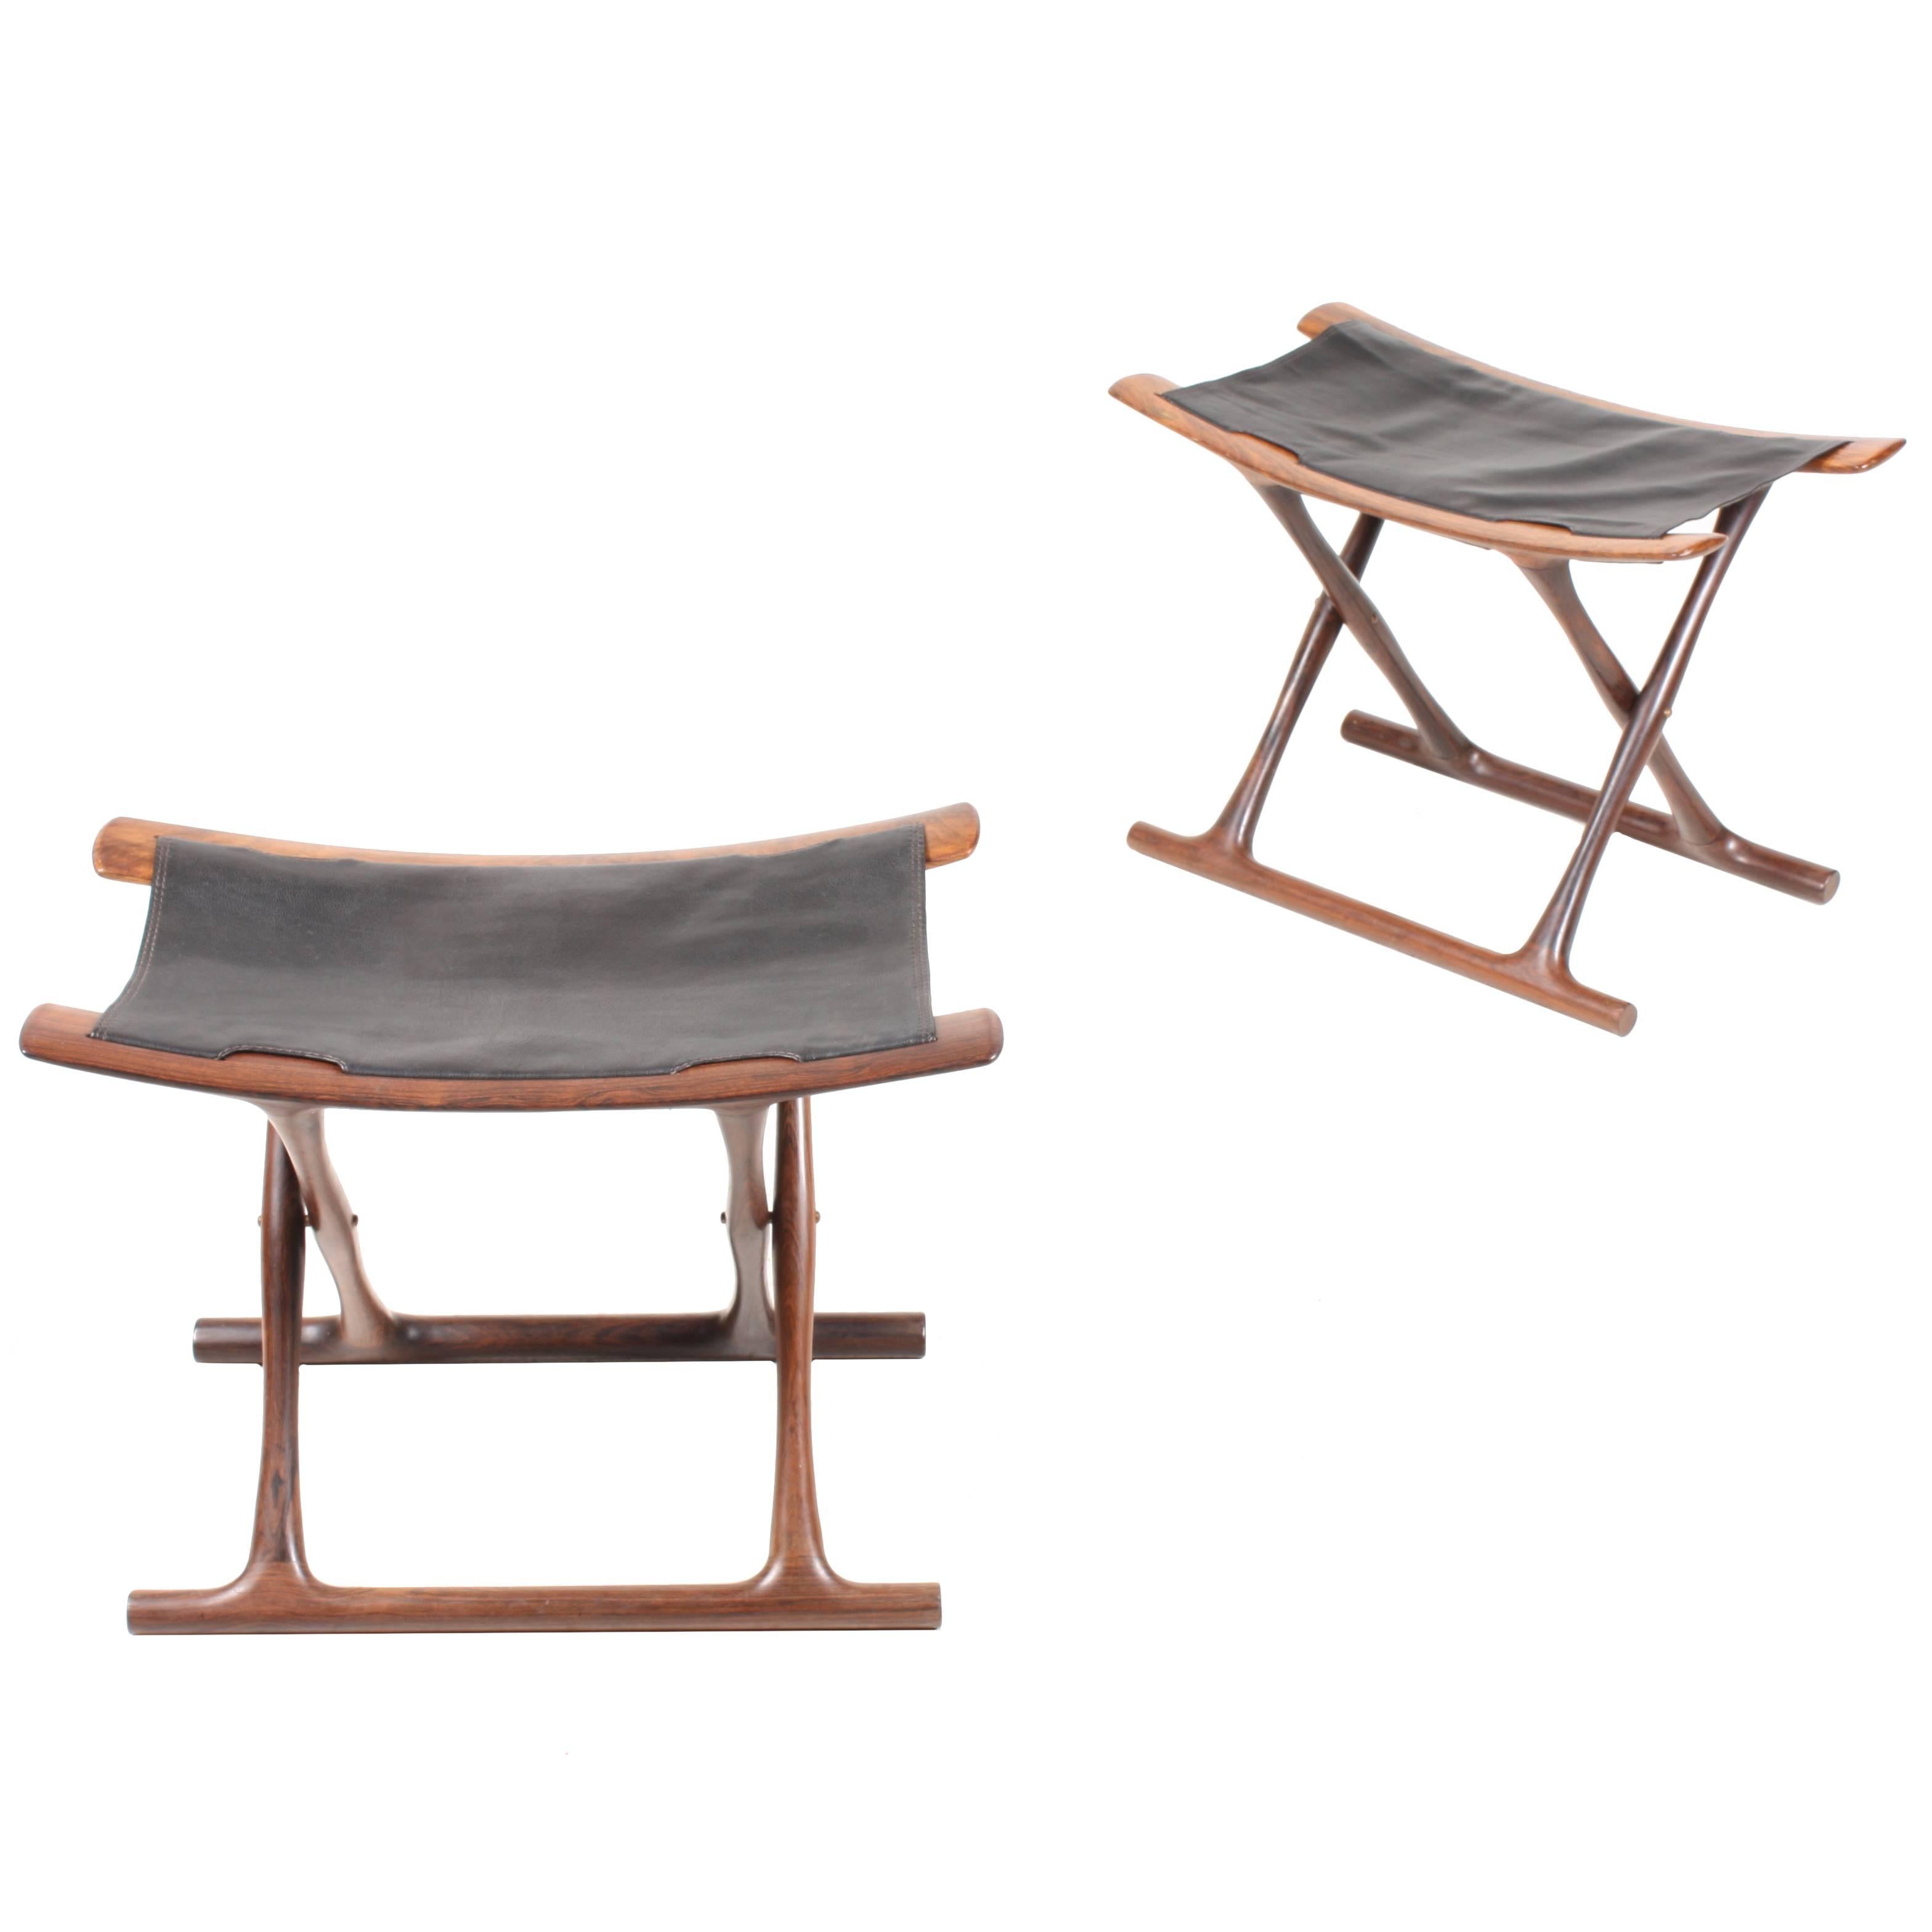 Pair of Rosewood Folding Stools Design by Ole Wanscher